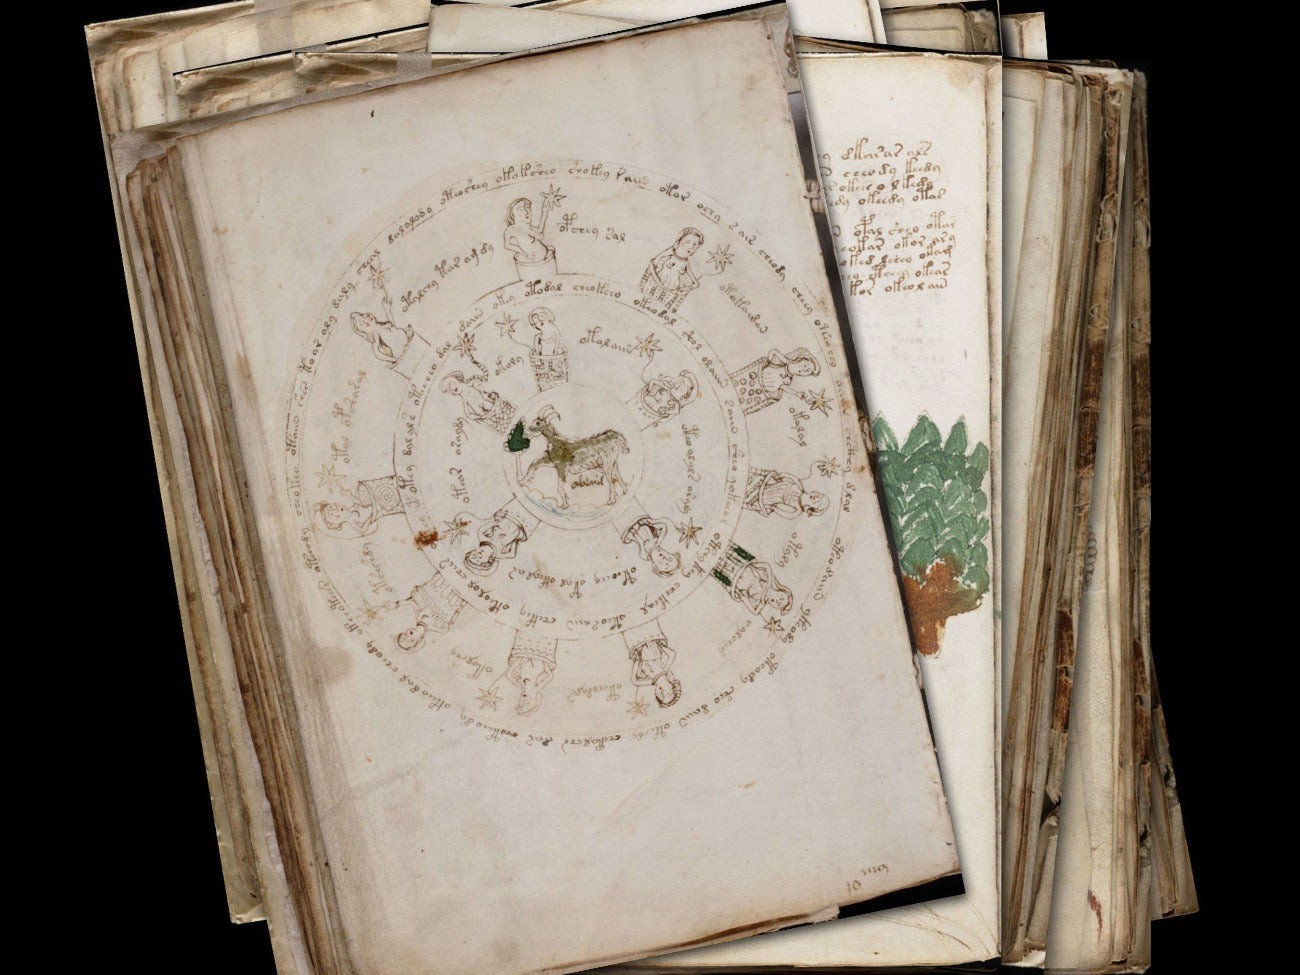 Close-up image of one page of the Voynich Manuscript showing script and image detail- Morgana Magick Spell